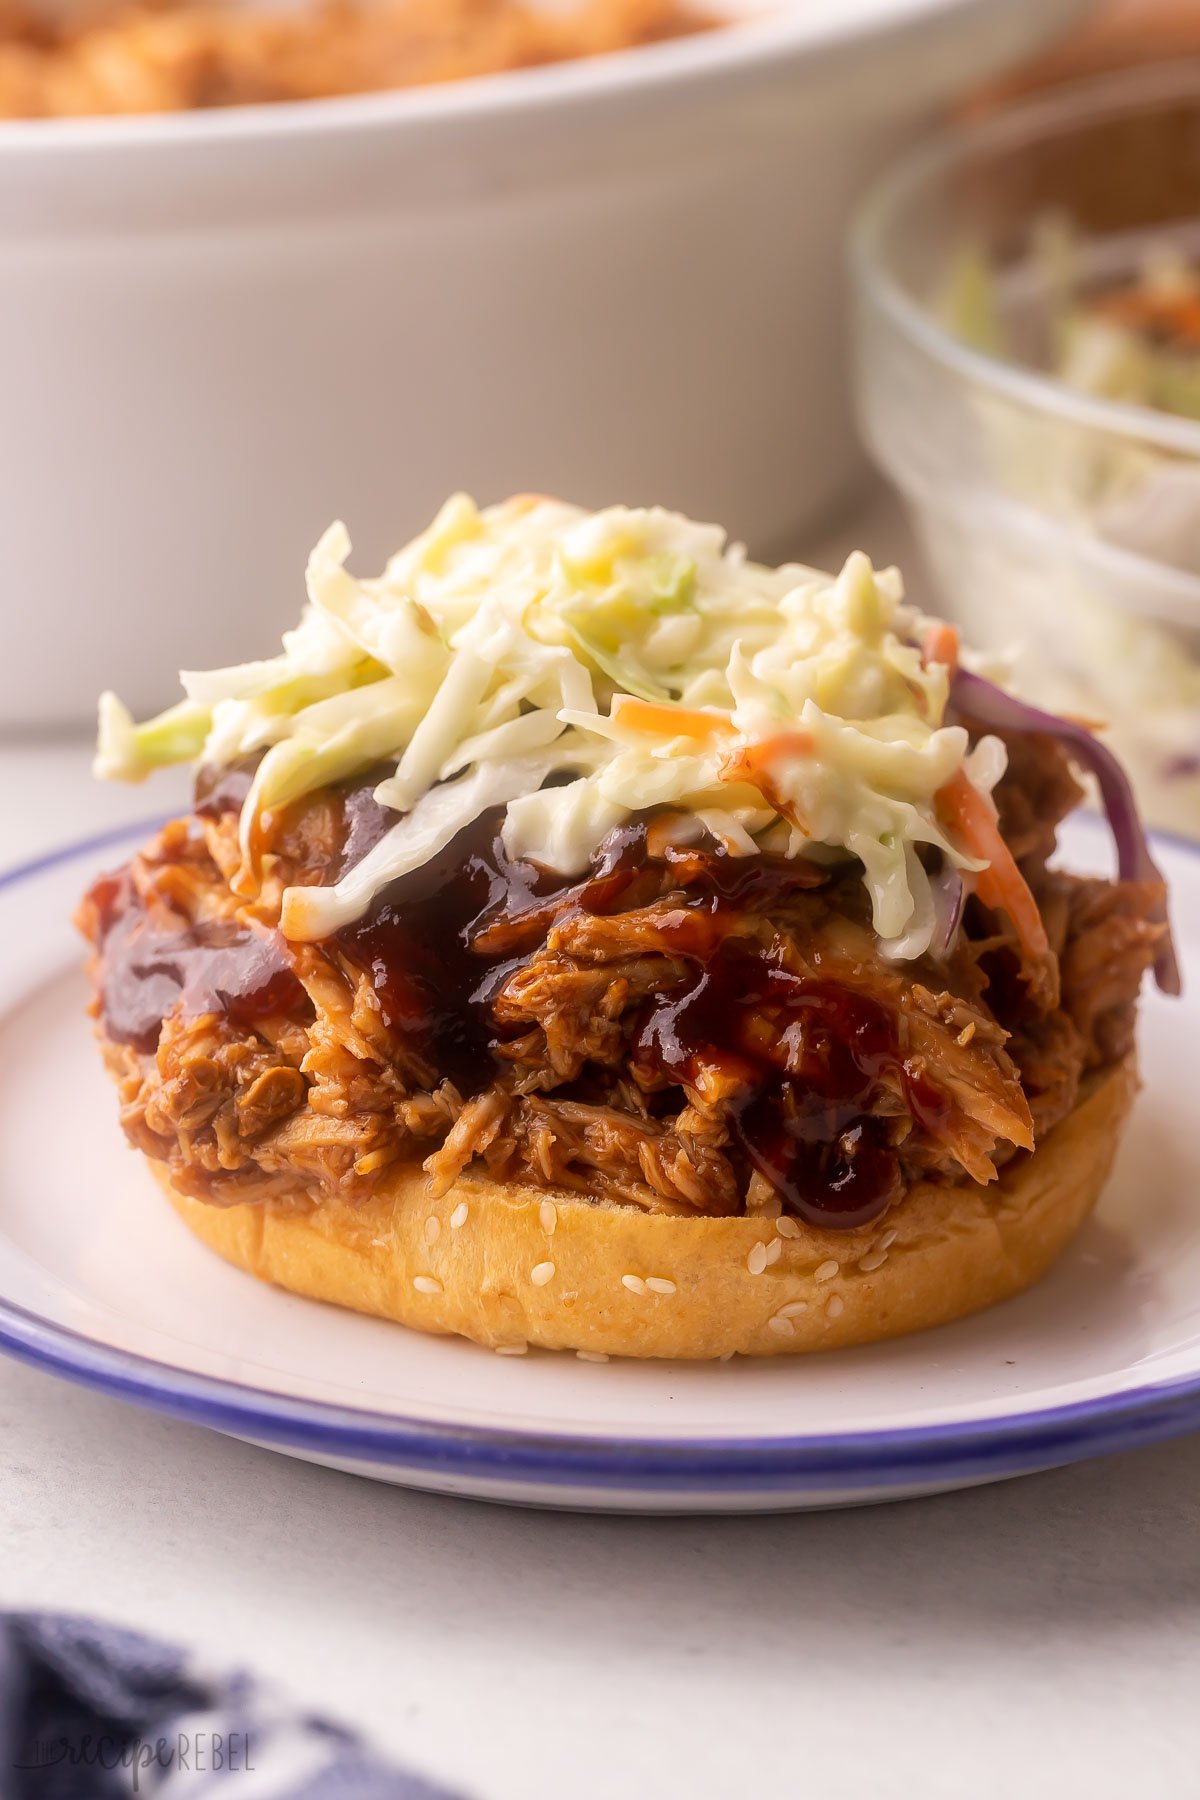 bun on a white plate topped with pulled pork and coleslaw.